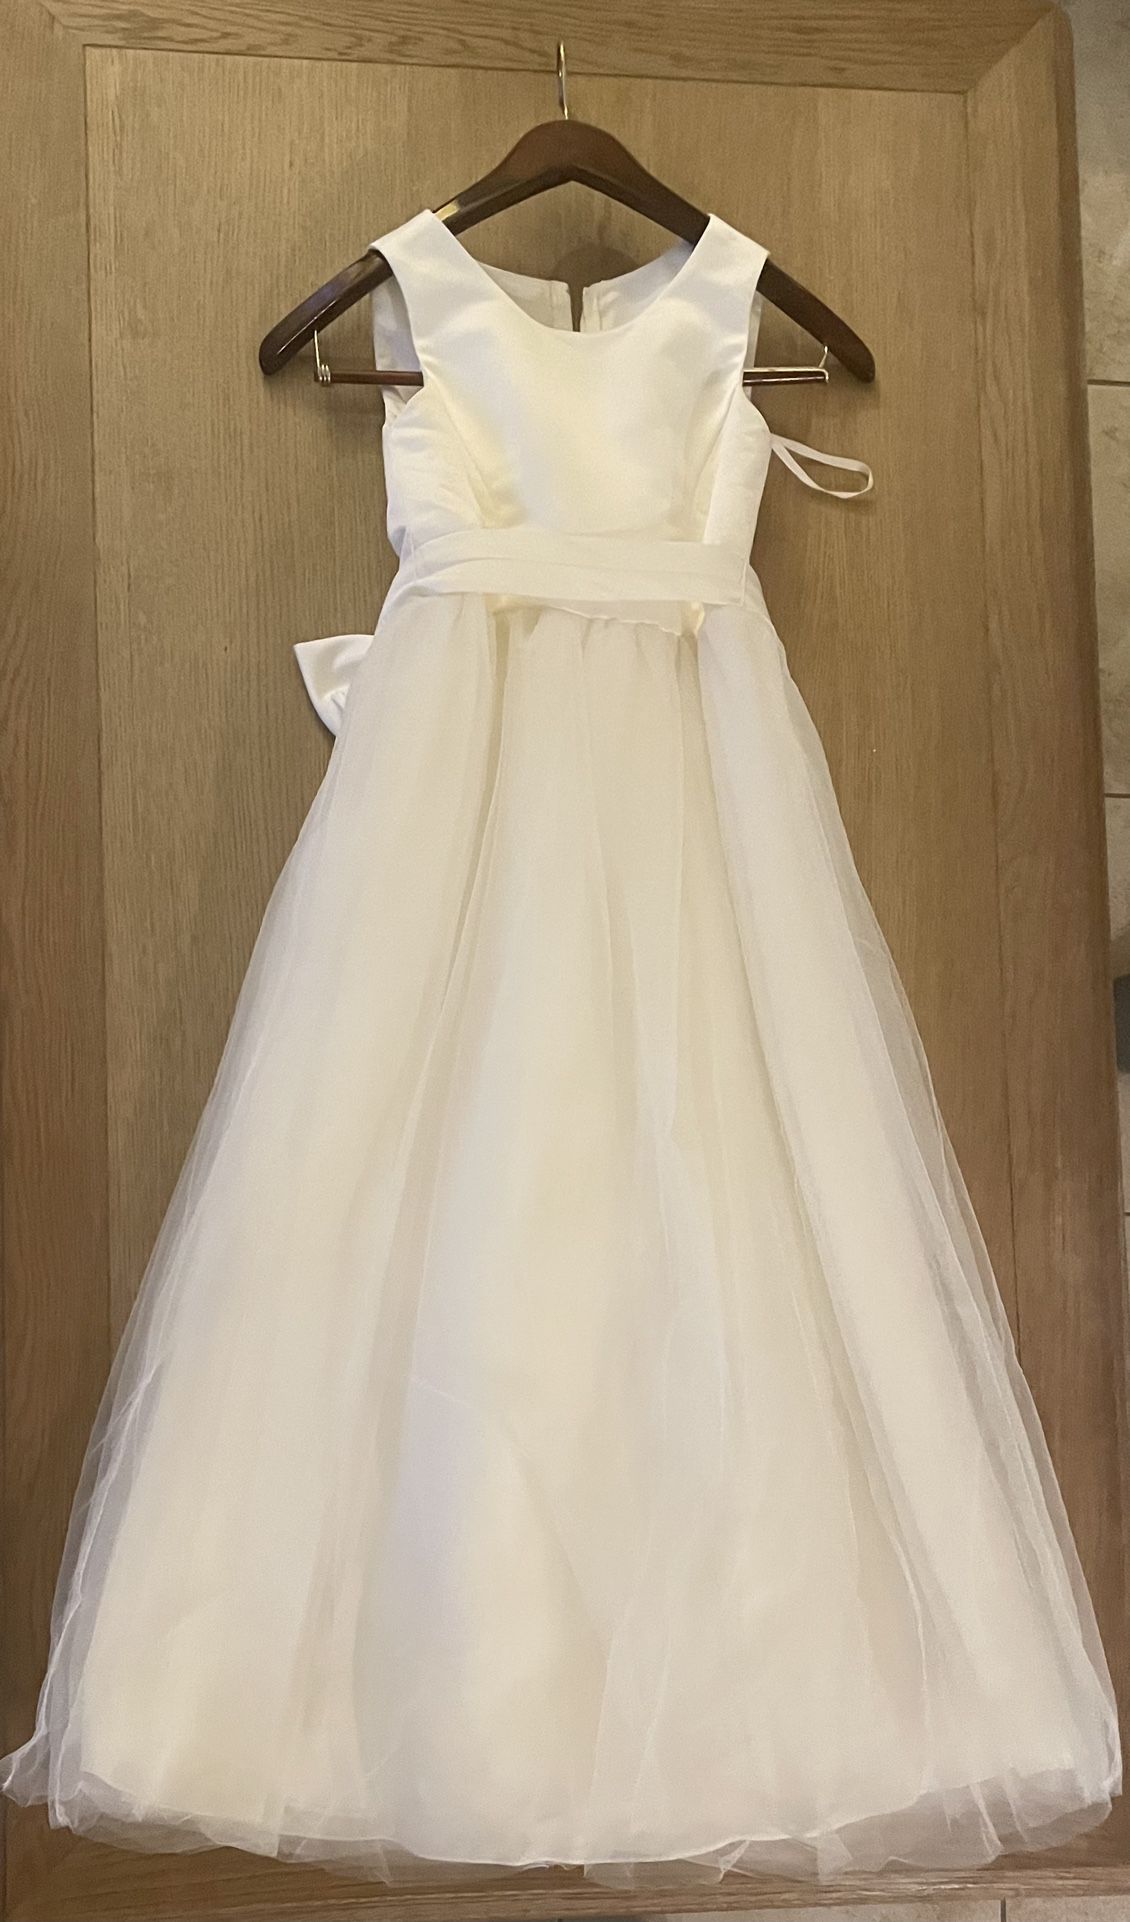 David’s Bridal Ivory Satin Dress with Tulle Skirt. Back zipper; fully lined. I have 2 dresses. Size 10 and 12.  Communion Dress